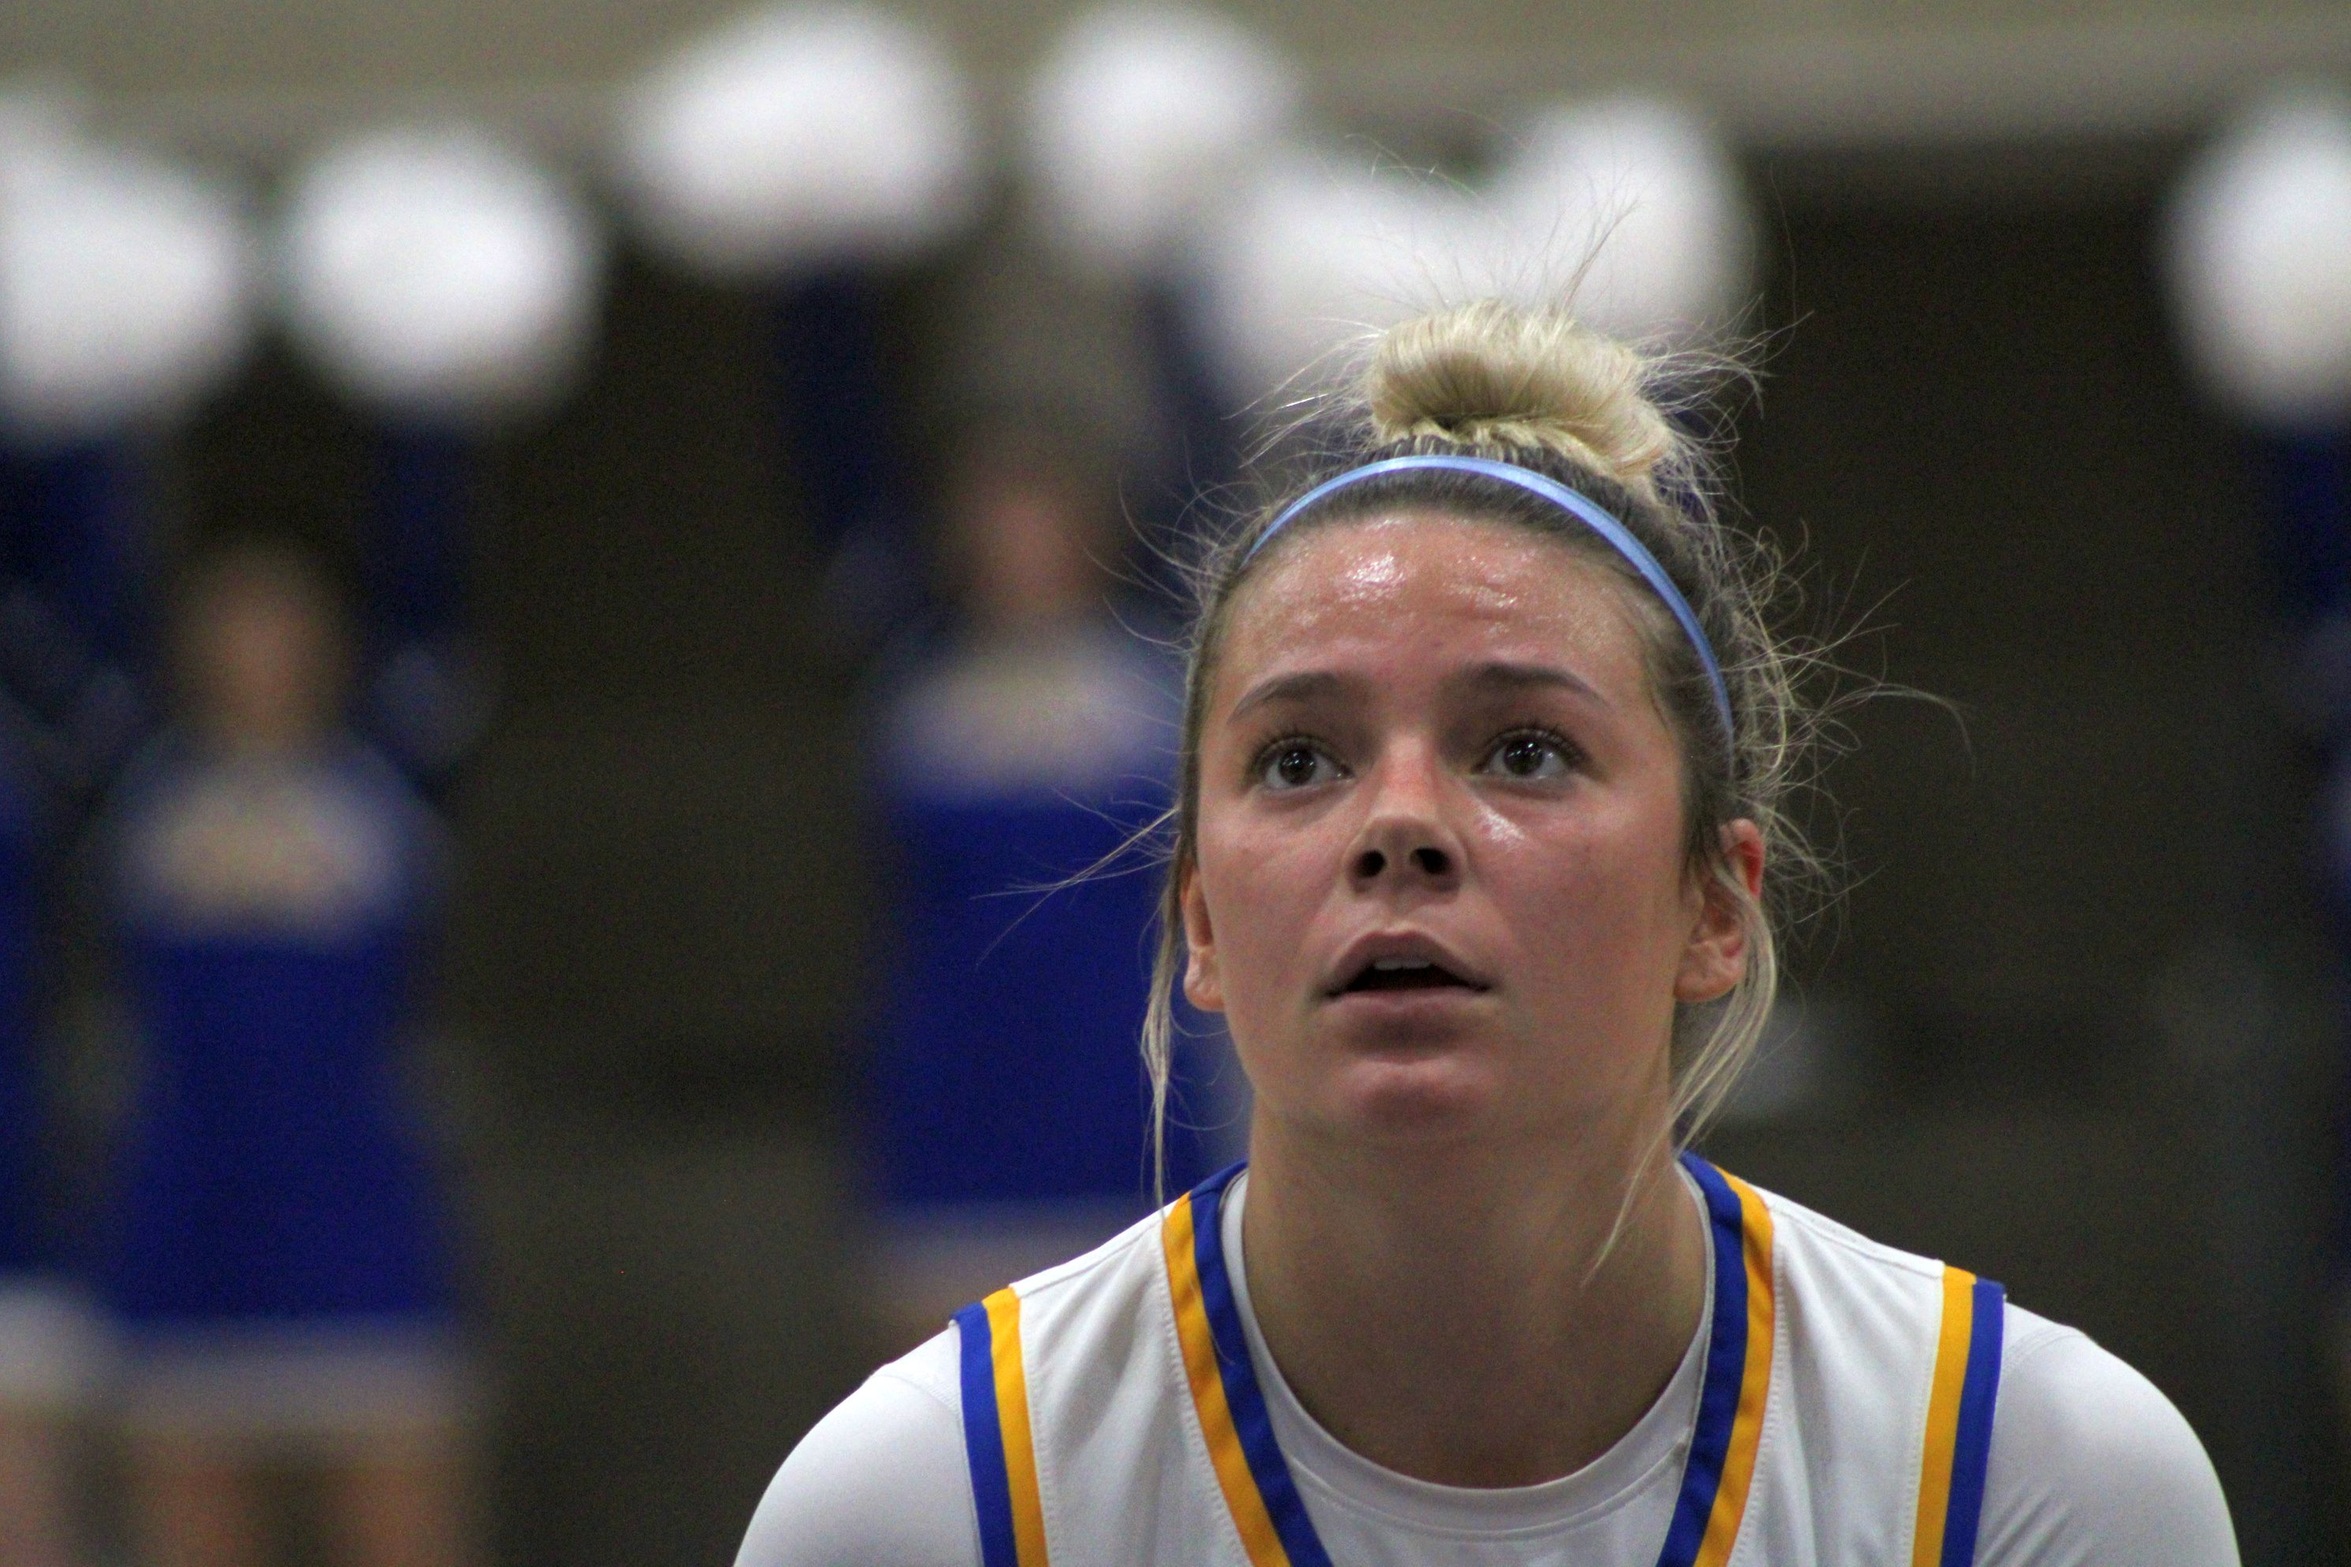 NIACC's Tori Miller was selected as the ICCAC women's basketball player of the week for the week of Nov. 20-26.